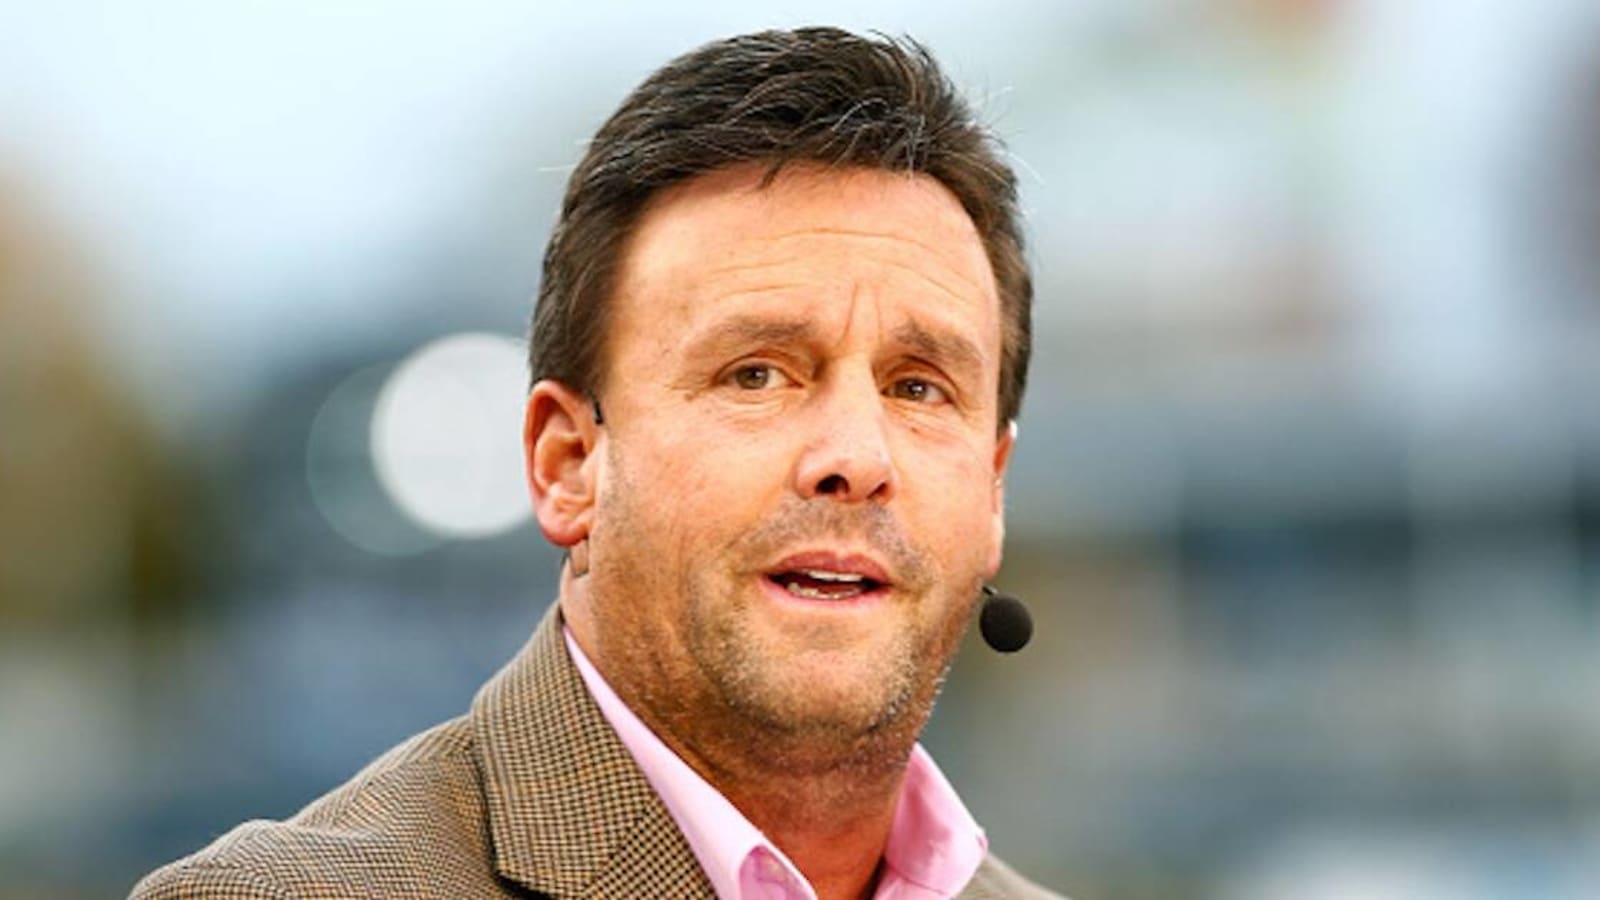 ESPN’s Karl Ravech comes under fire for asking insensitive Mother’s Day question